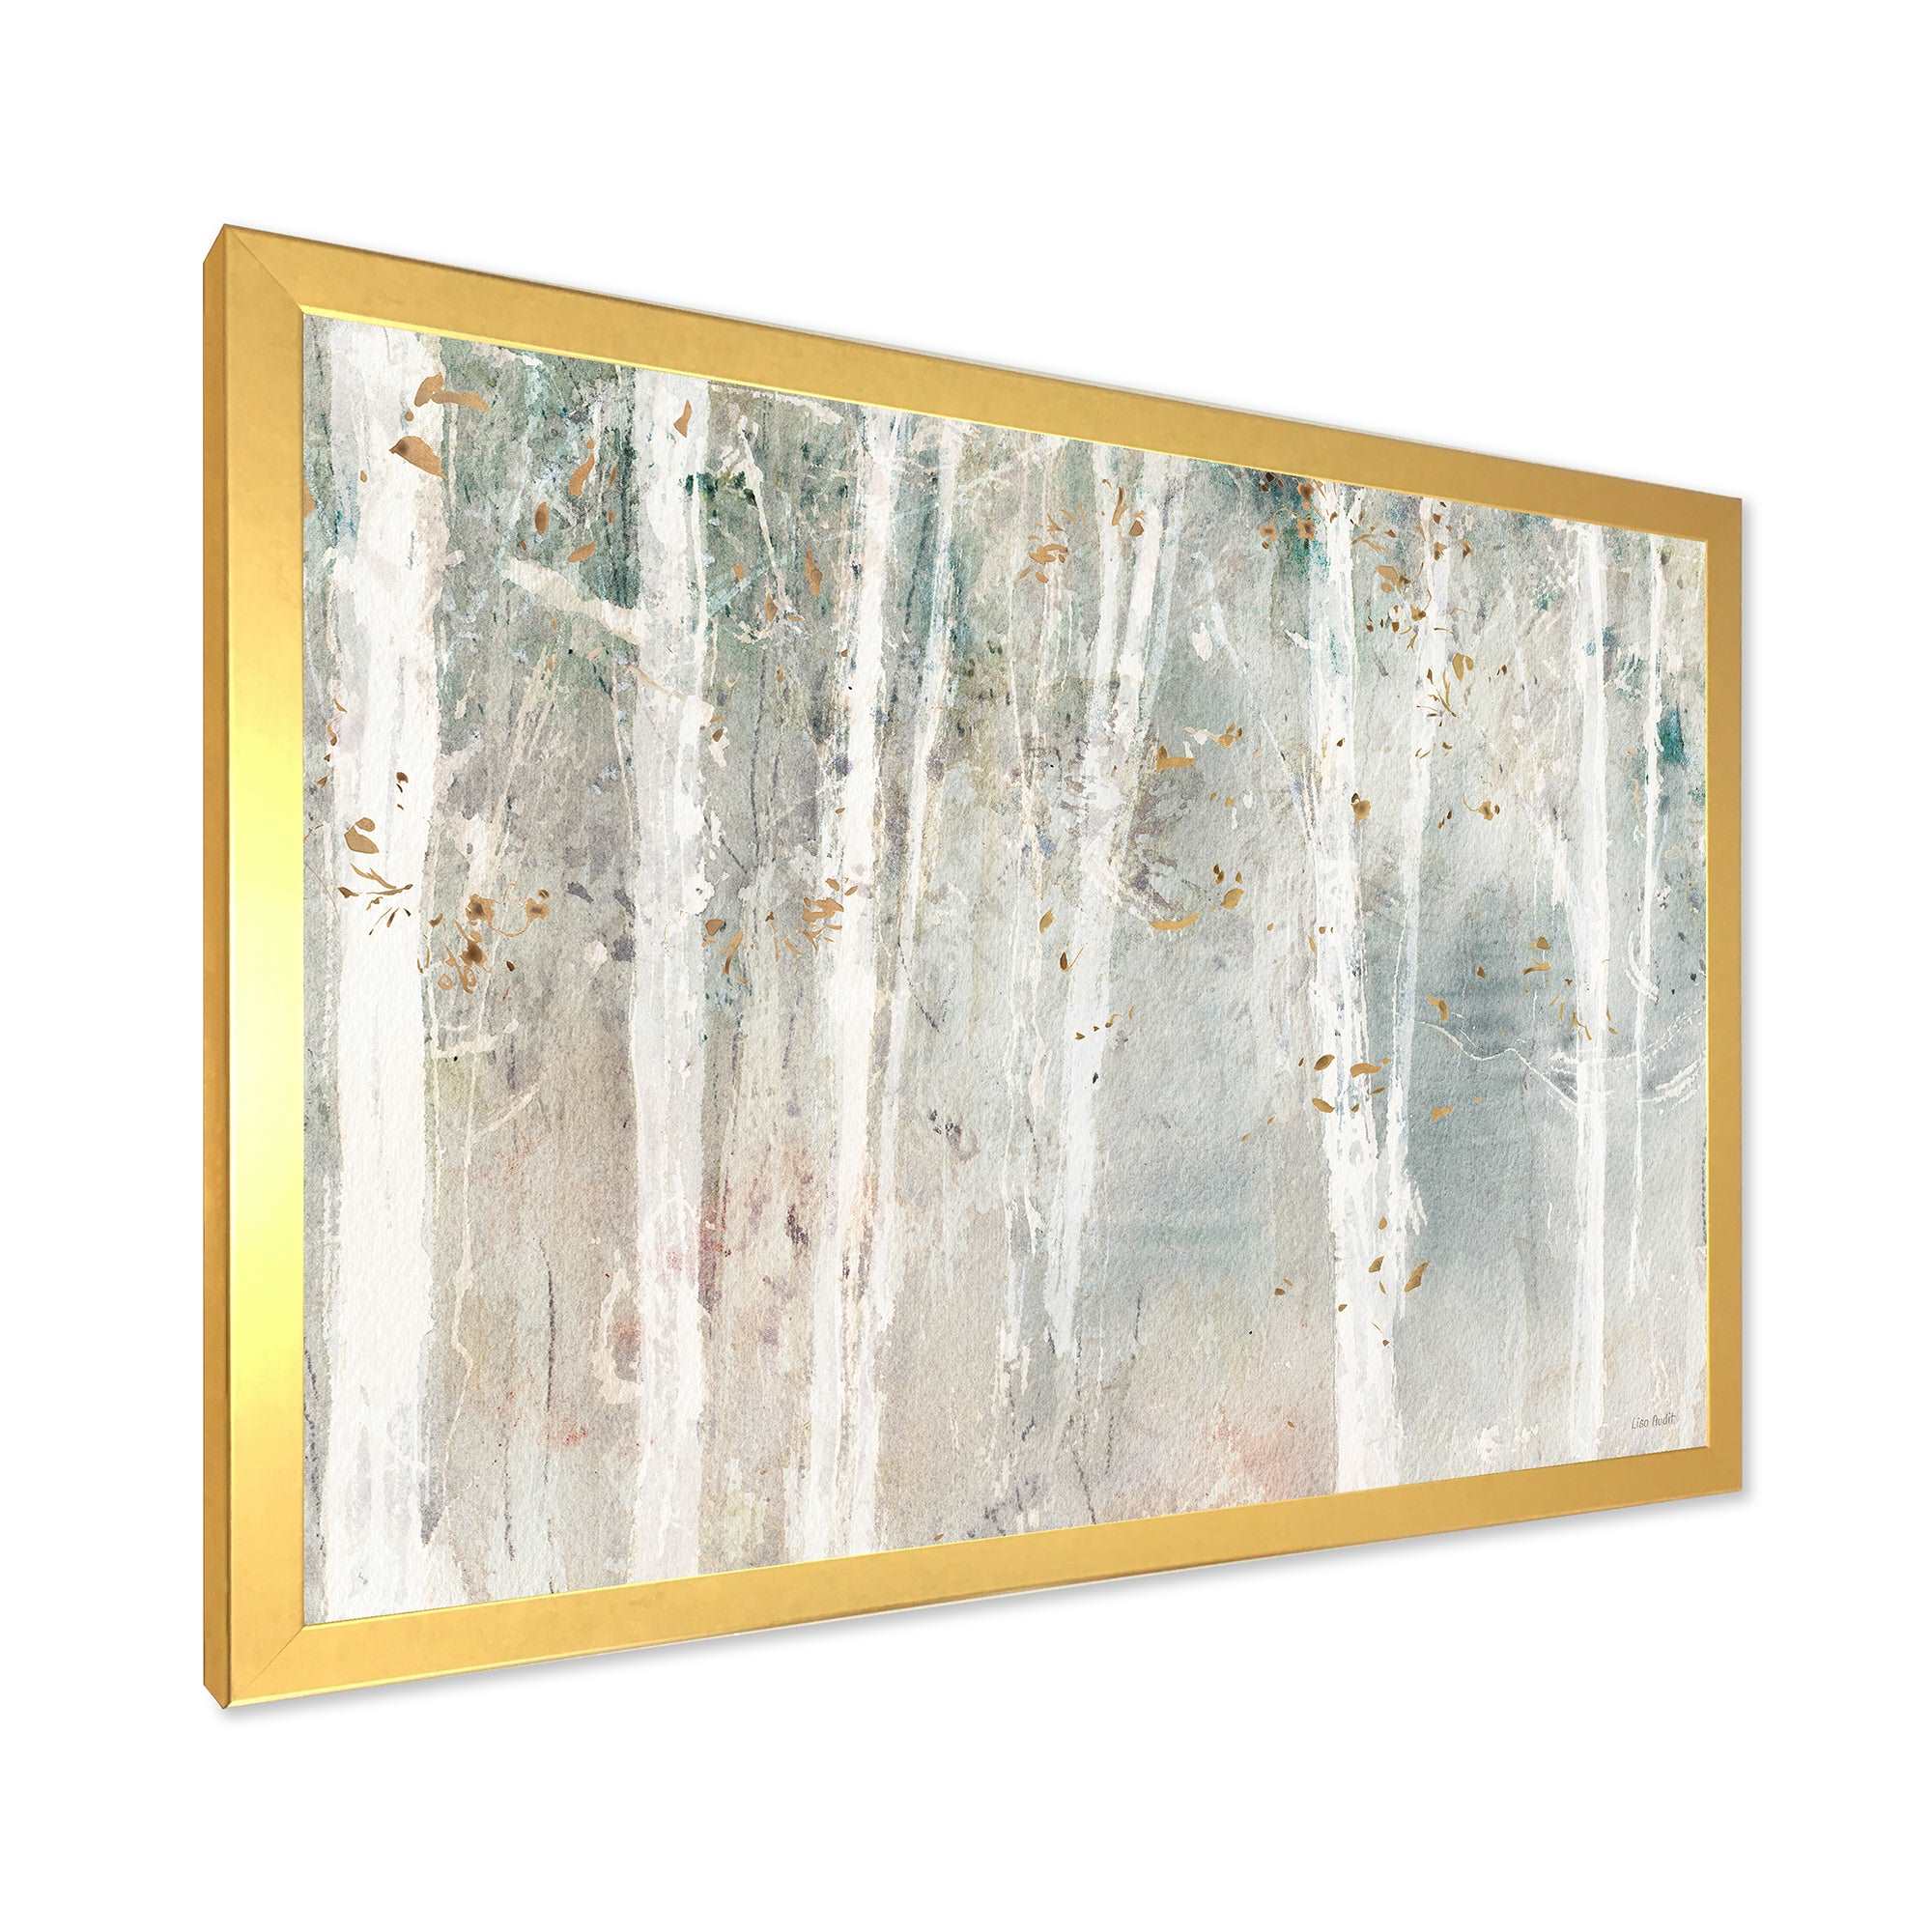 A Woodland Walk into the Forest VII Framed Print Vibrant Gold - 1.5" Width